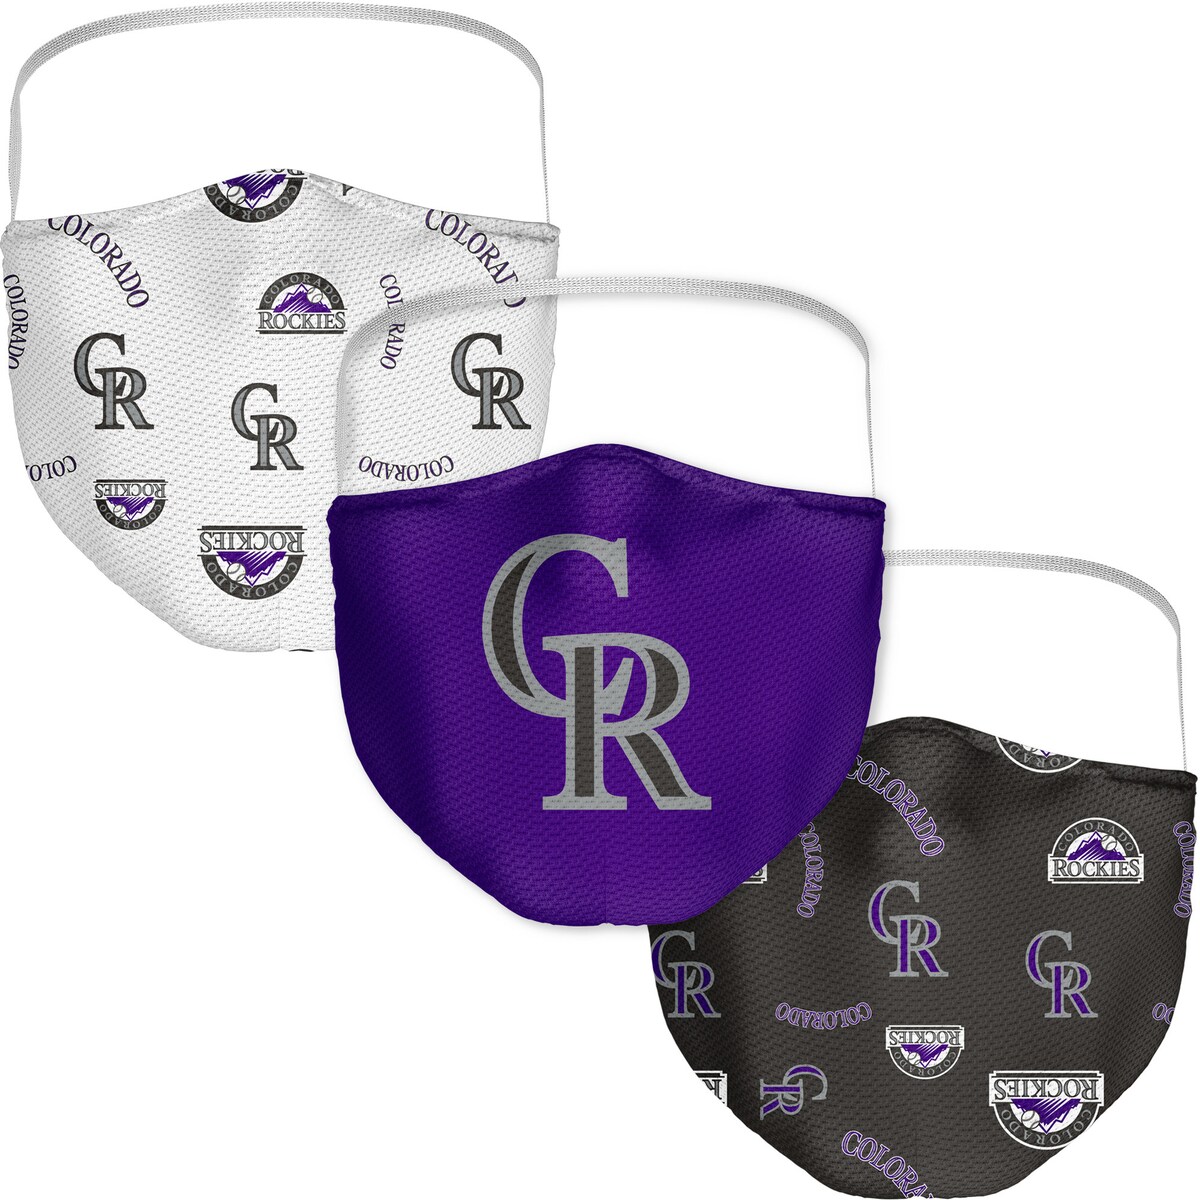 Cover up while you represent your favorite team in this Colorado Rockies All Over Logo Face Covering 3-Pack from Fanatics Branded!This item is non-returnableMaterial: 100% PolyesterElastic closuresOfficially licensedReturns: Face covering(s) can be returned if and only if they are unopened, unworn, and sealed in original packaging with original tags and labels. Your return will be inspected upon arrival before your refund is processed. We reserve the right to refuse a refund if there is any evidence of use or tamper to the packaging.ImportedWARNING: CHOKING HAZARD-Not intended for children. Children can choke or suffocateBrand: Fanatics BrandedThis product is not a medical device. It is not intended to be personal protective equipment and should not be used by healthcare professionals or used in a healthcare/clinical environment or setting. The product is not intended to prevent or protect from any form of illness or disease (or otherwise).Contains three to a pack